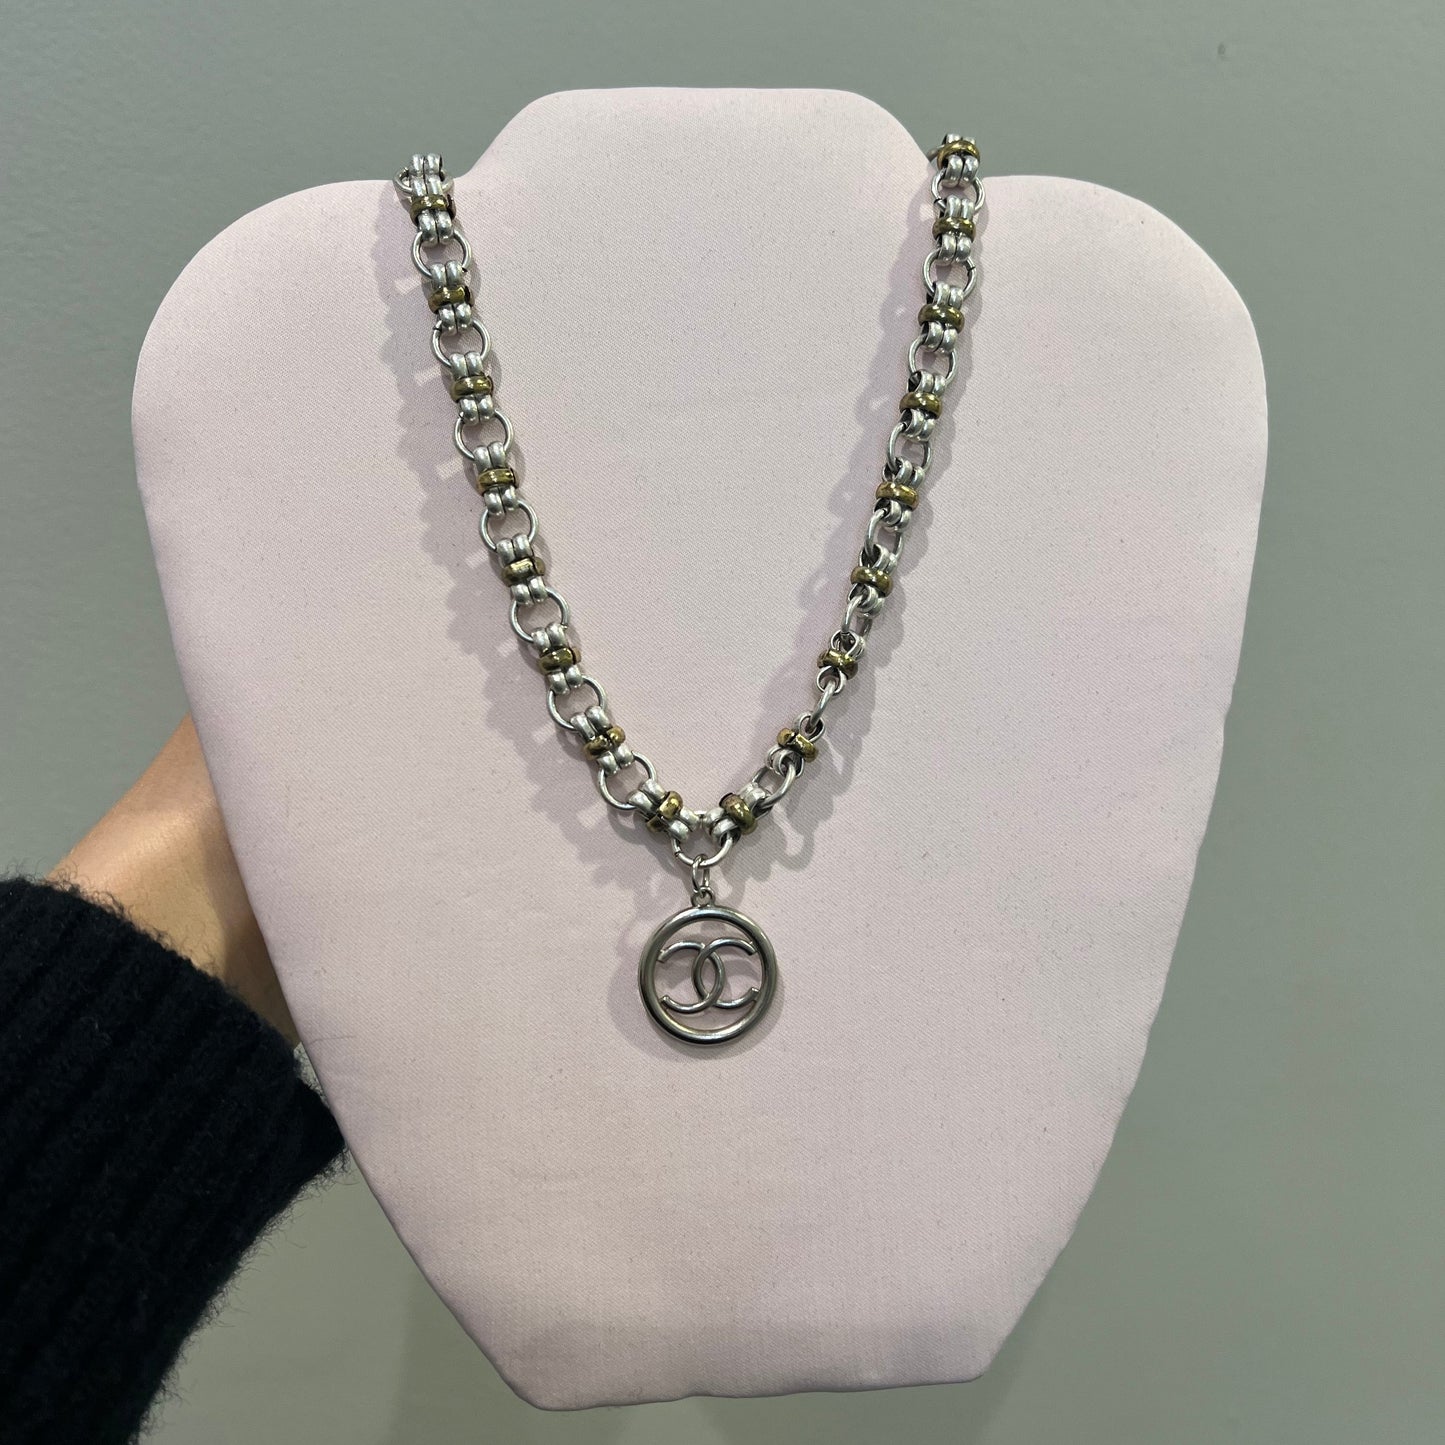 Repurposed mixed metal Chanel necklace